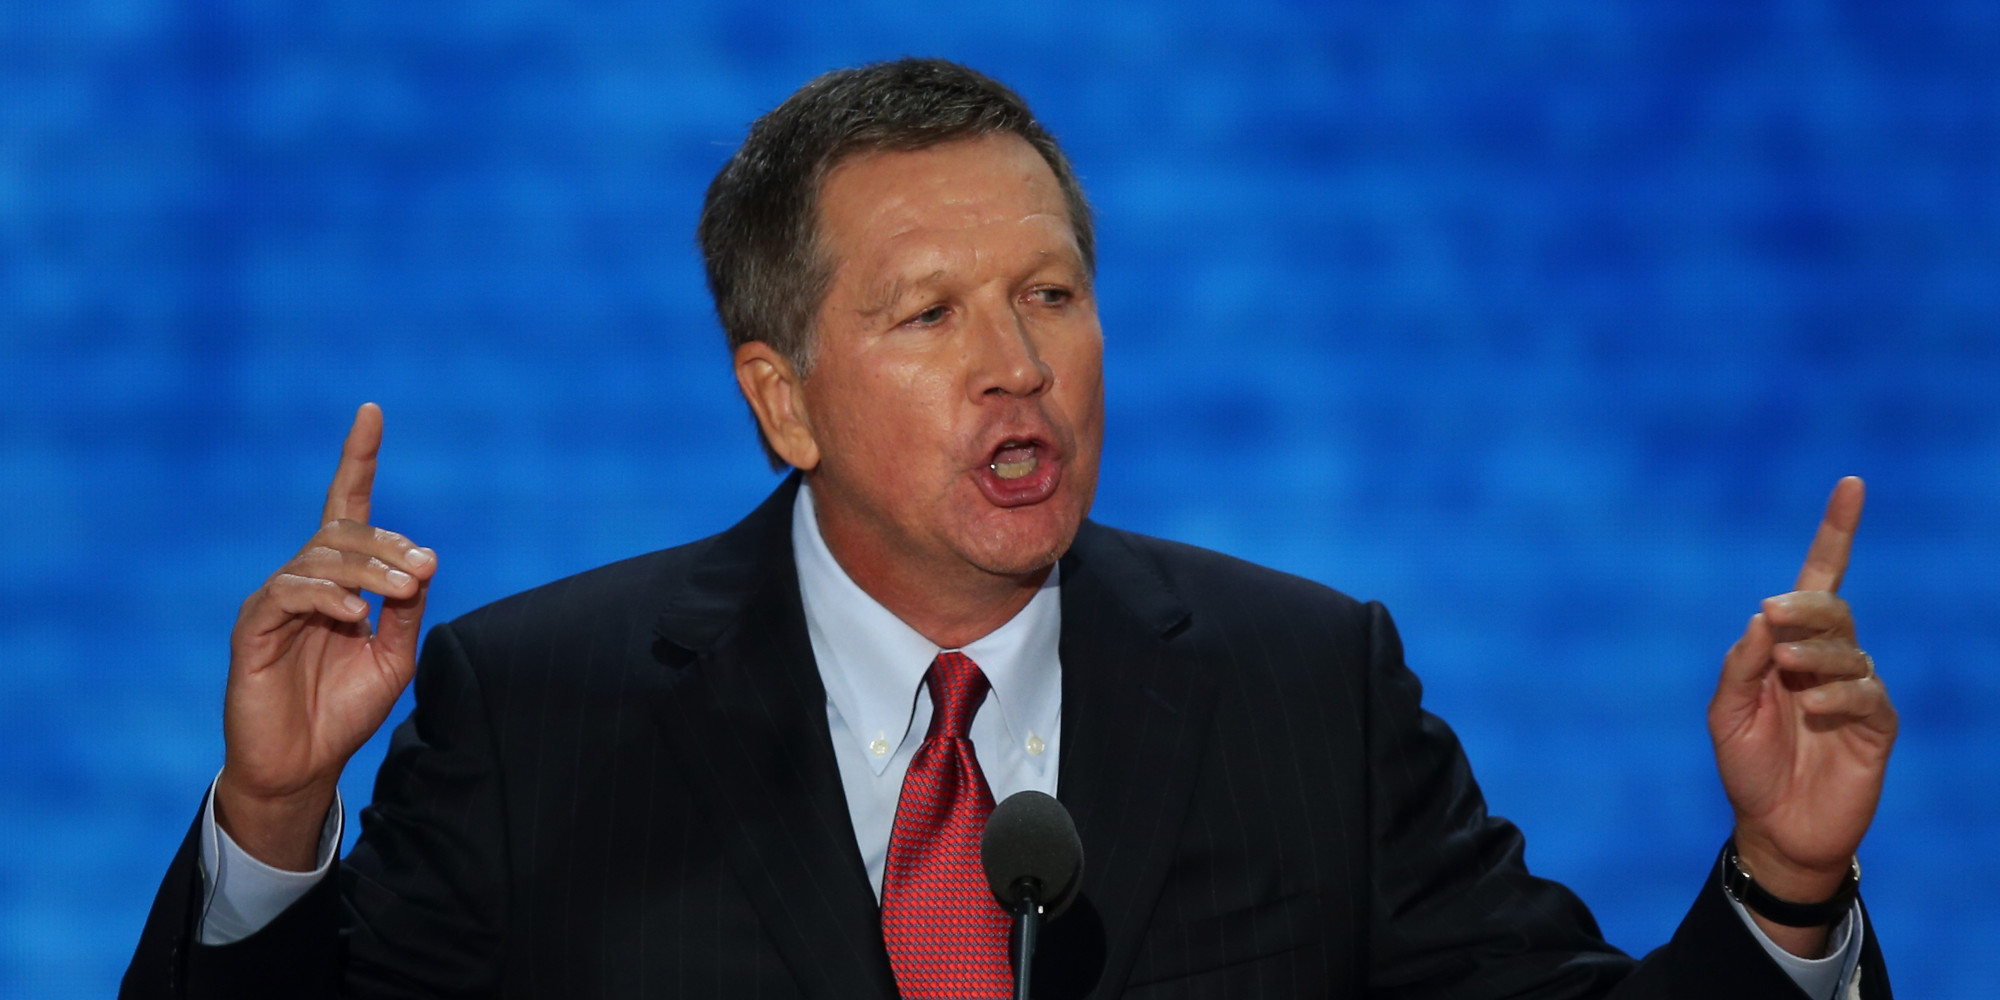 TAMPA, FL - AUGUST 28:  Ohio Gov. John Kasich speaks during the Republican National Convention at the Tampa Bay Times Forum on August 28, 2012 in Tampa, Florida. Today is the first full session of the RNC after the start was delayed due to Tropical Storm Isaac.  (Photo by Mark Wilson/Getty Images)